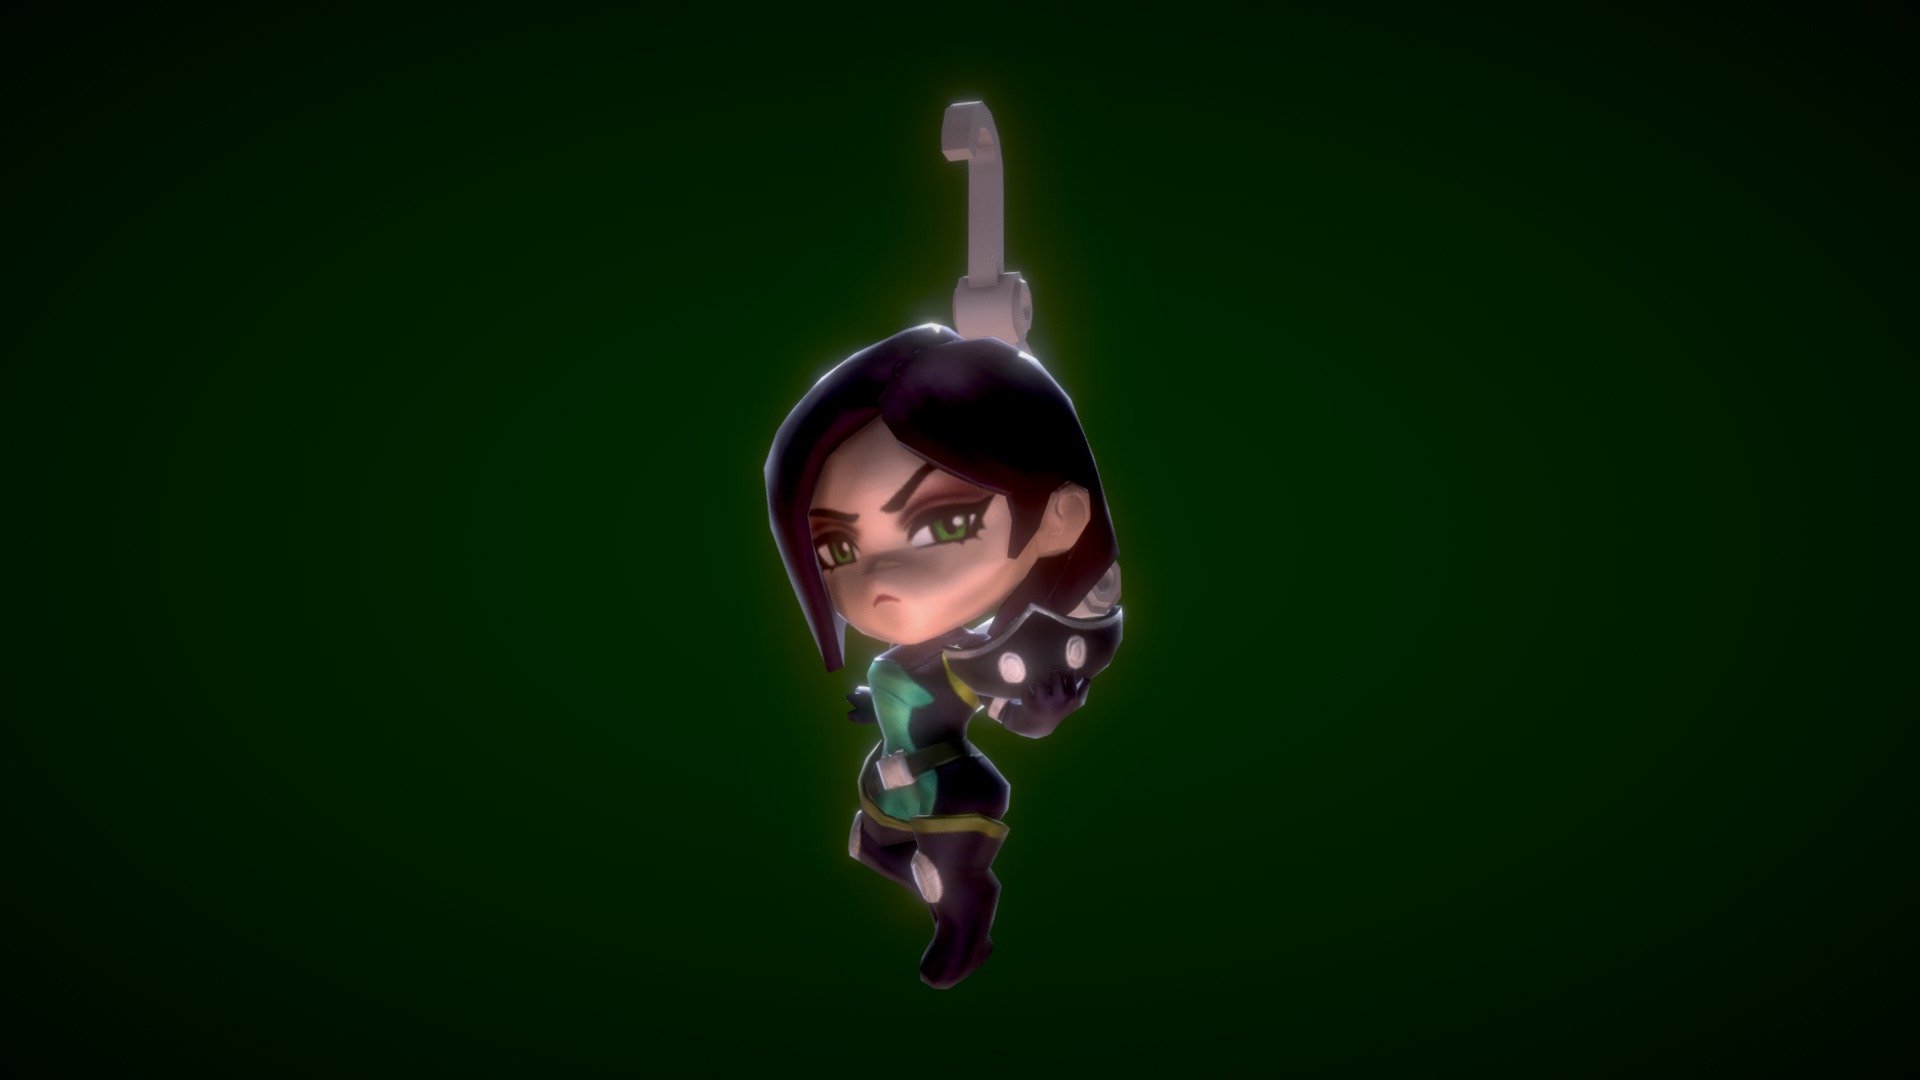 Valorant Chibi Characters Keychain for ingame Guns

Viper // Valorant - Valorant - Viper Chibi (Keychain) - Download Free 3D model by Luquita (@speedmodel) 3d model